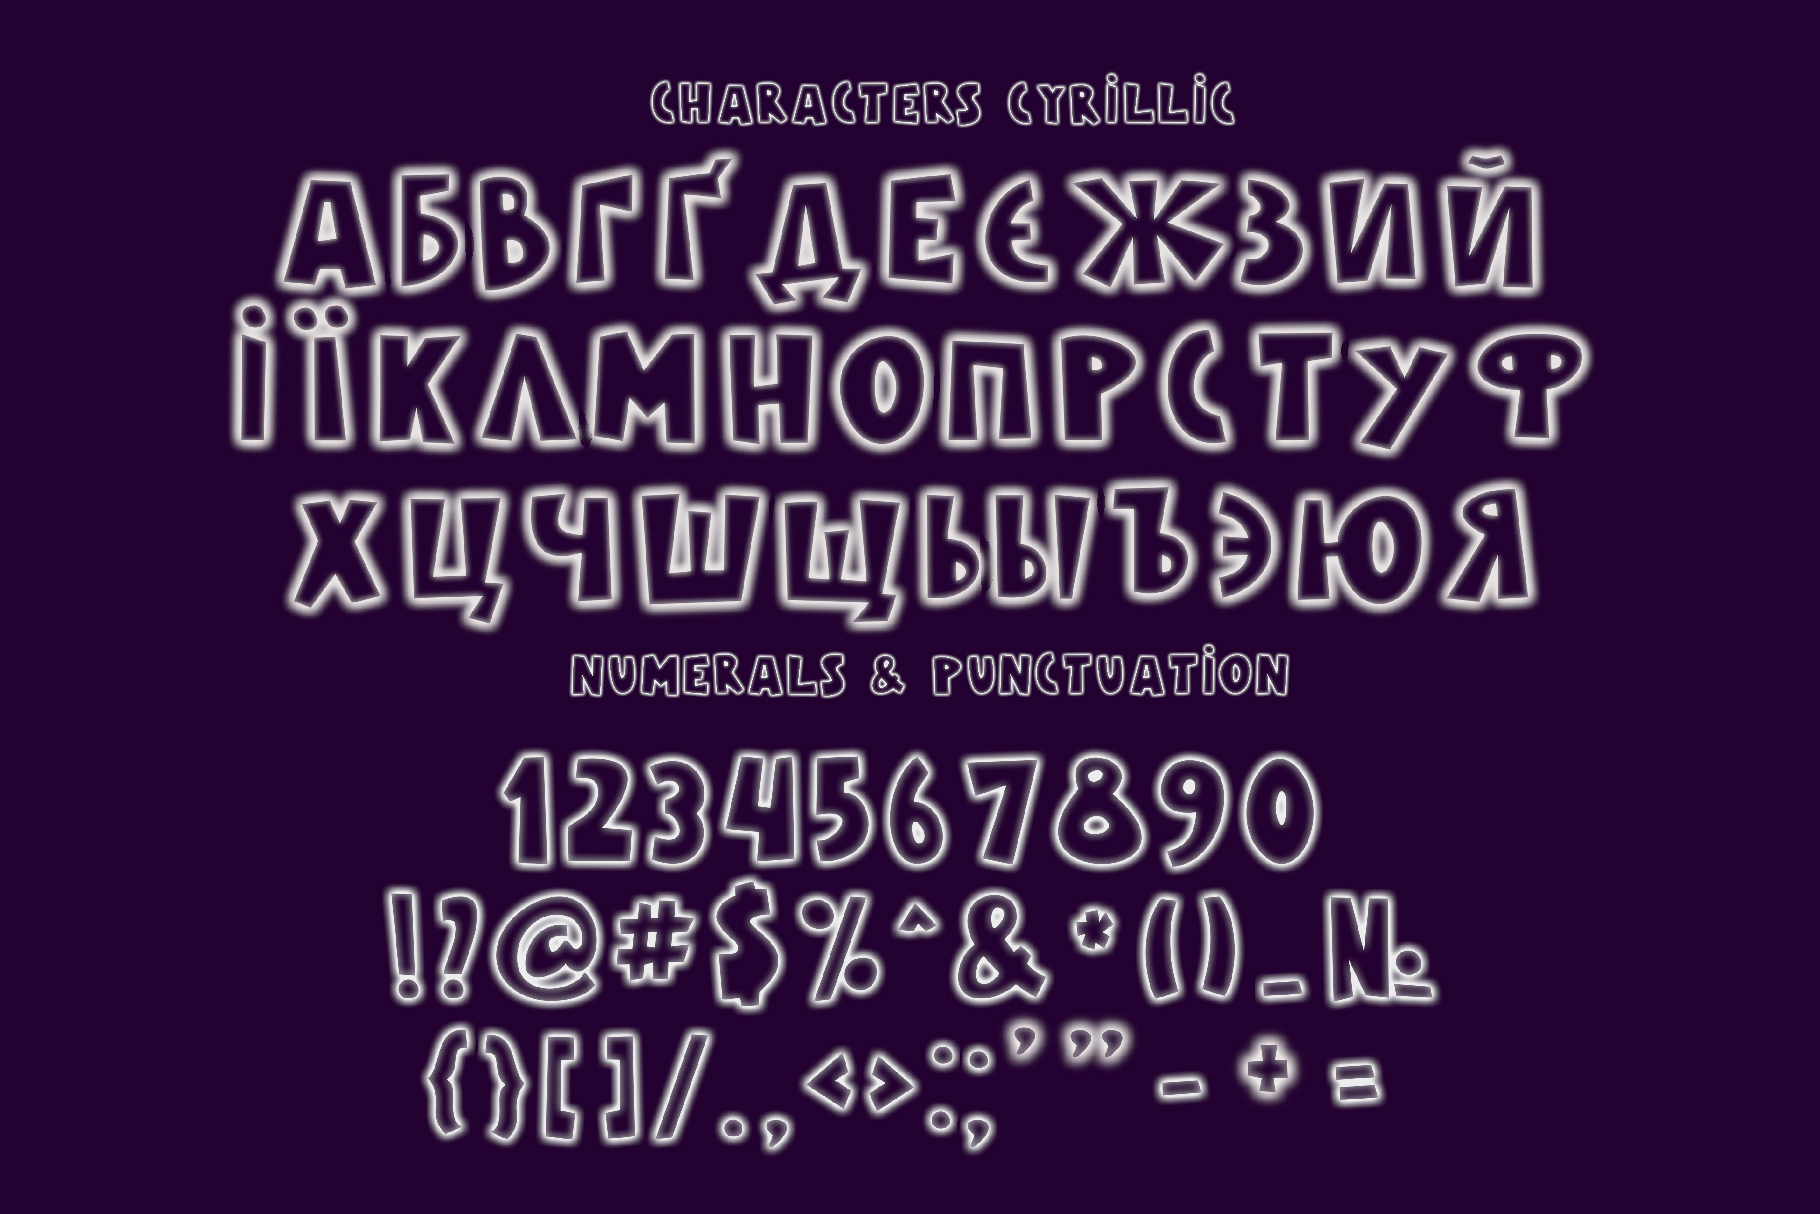 Cyrillic colorful version - numerals & punctuation on the purple background.